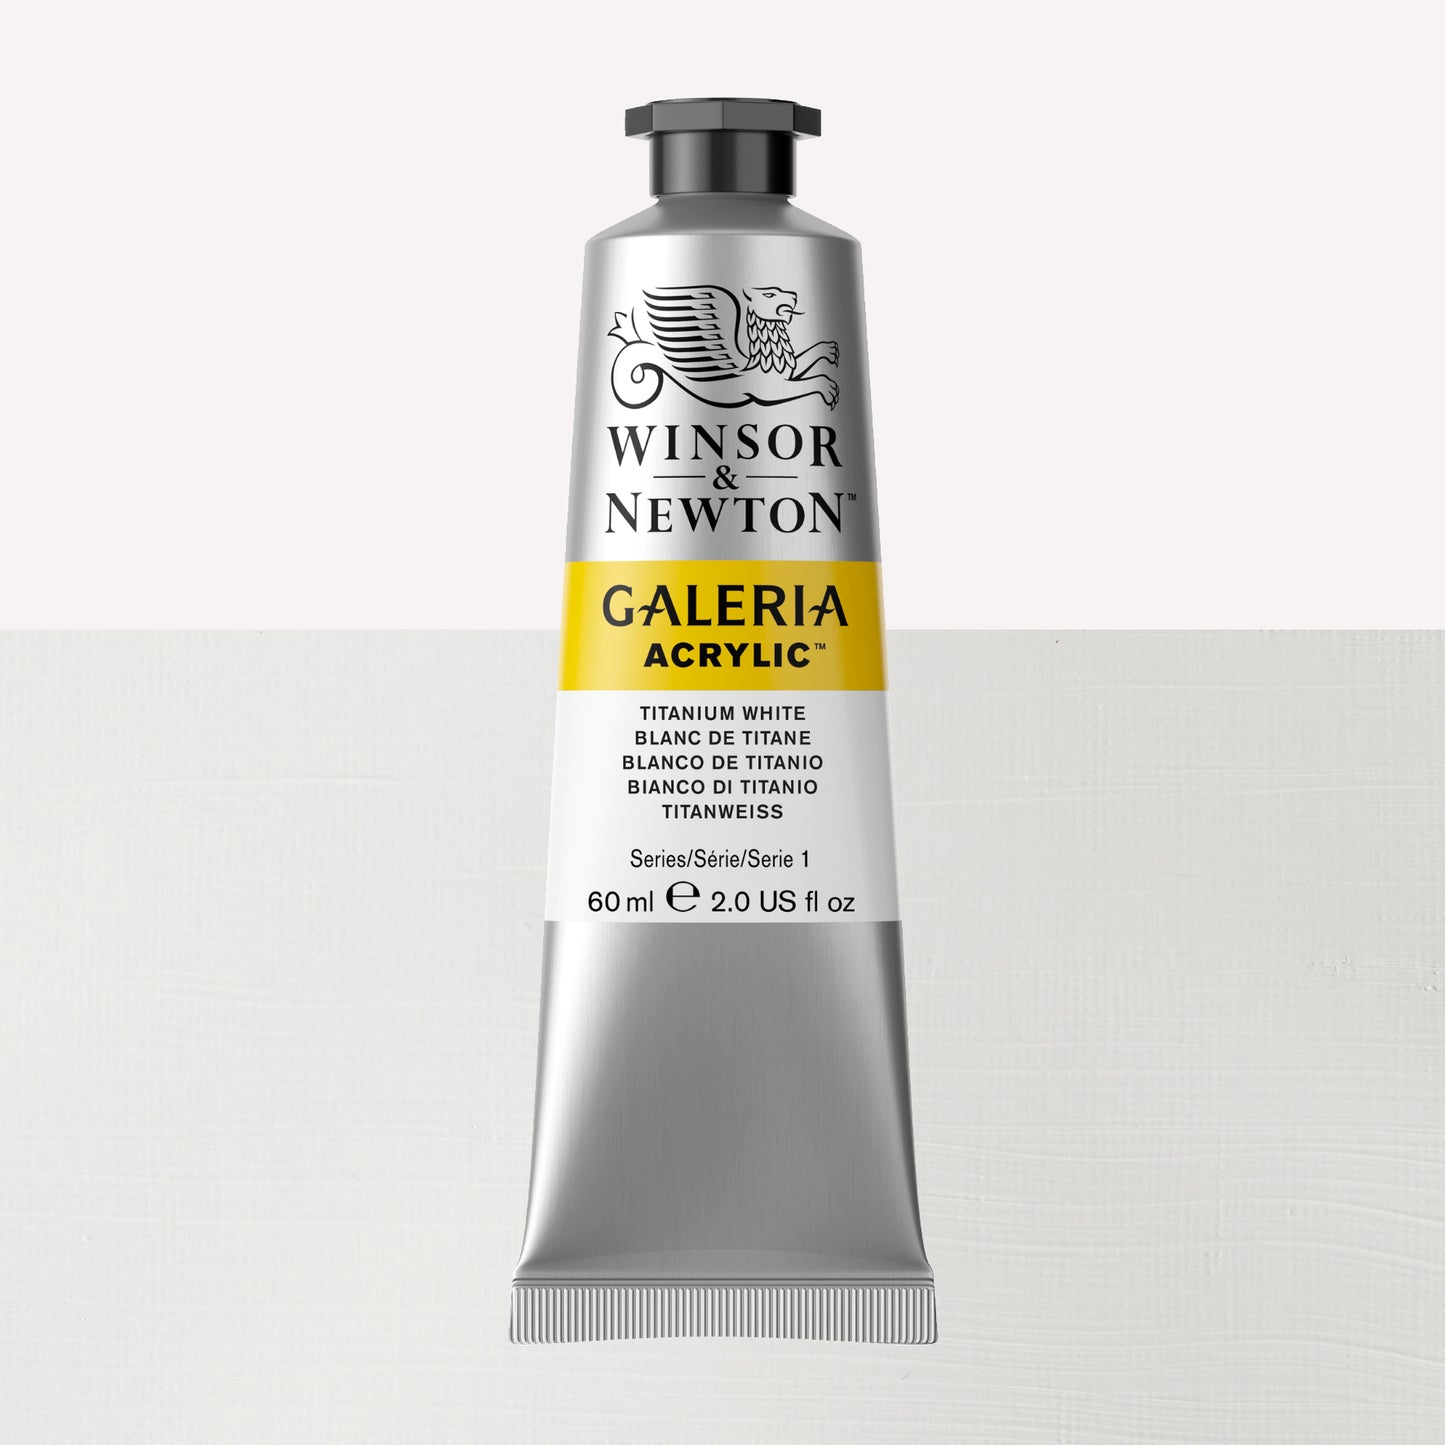 A 60ml tube of vibrant Galeria Acrylic paint in the shade Titanium White. This professional-quality paint is packaged in a silver tube with a black lid. Made by Winsor and Newton.